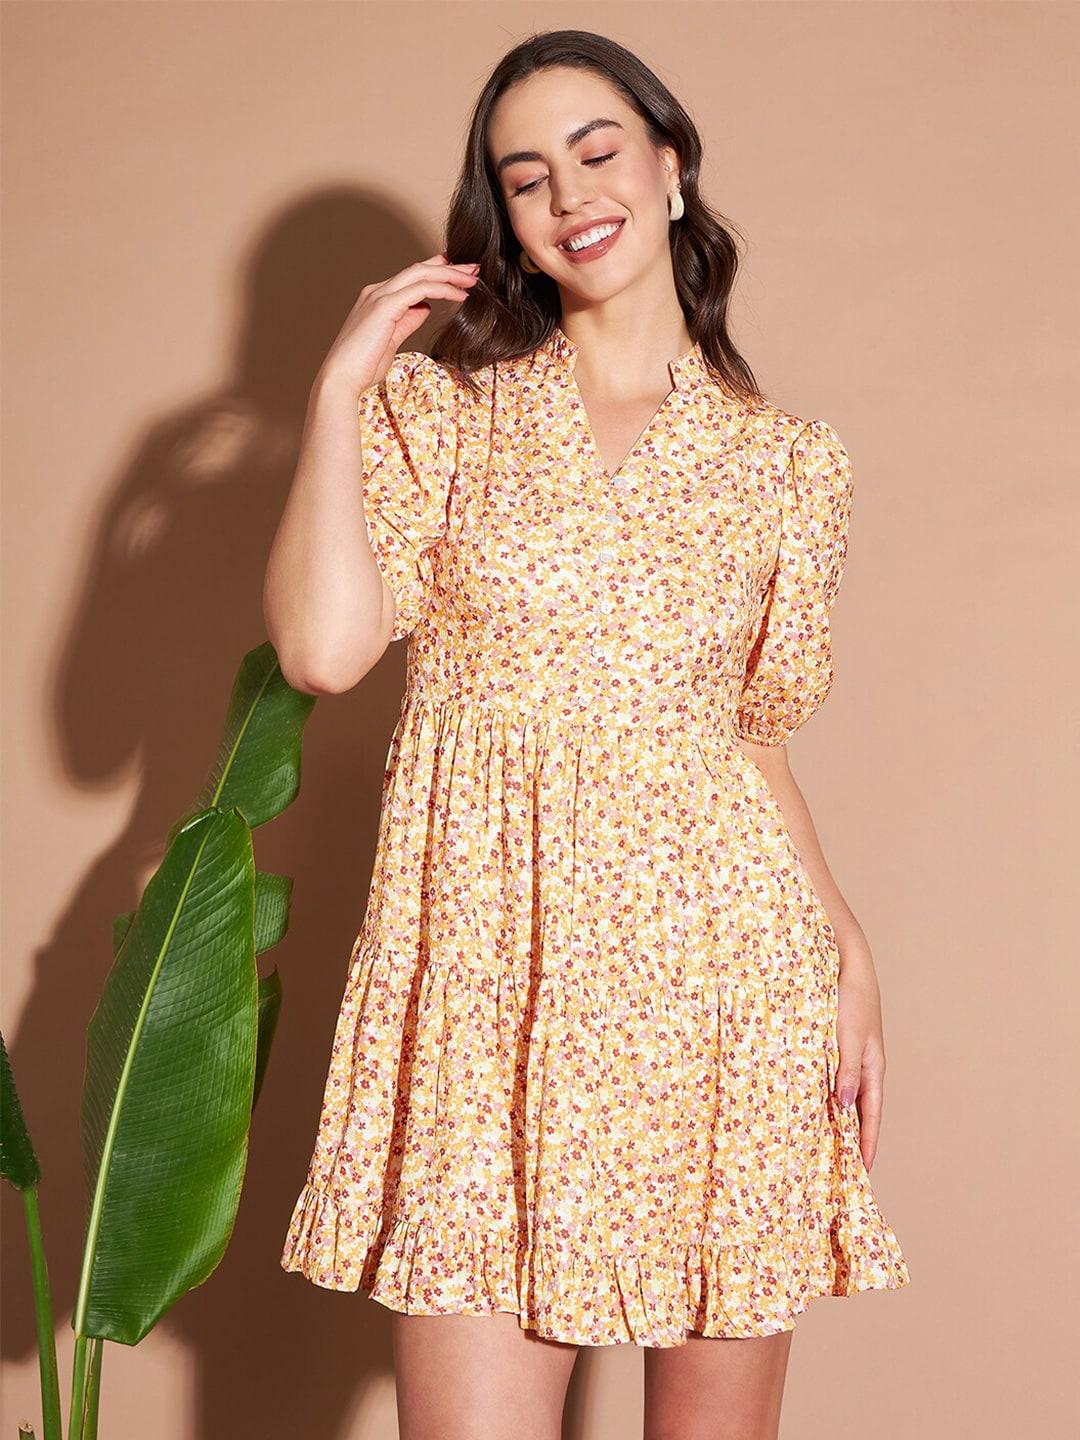 Marie Claire Yellow & White Floral Printed Puff Sleeves Fit & Flare Dress